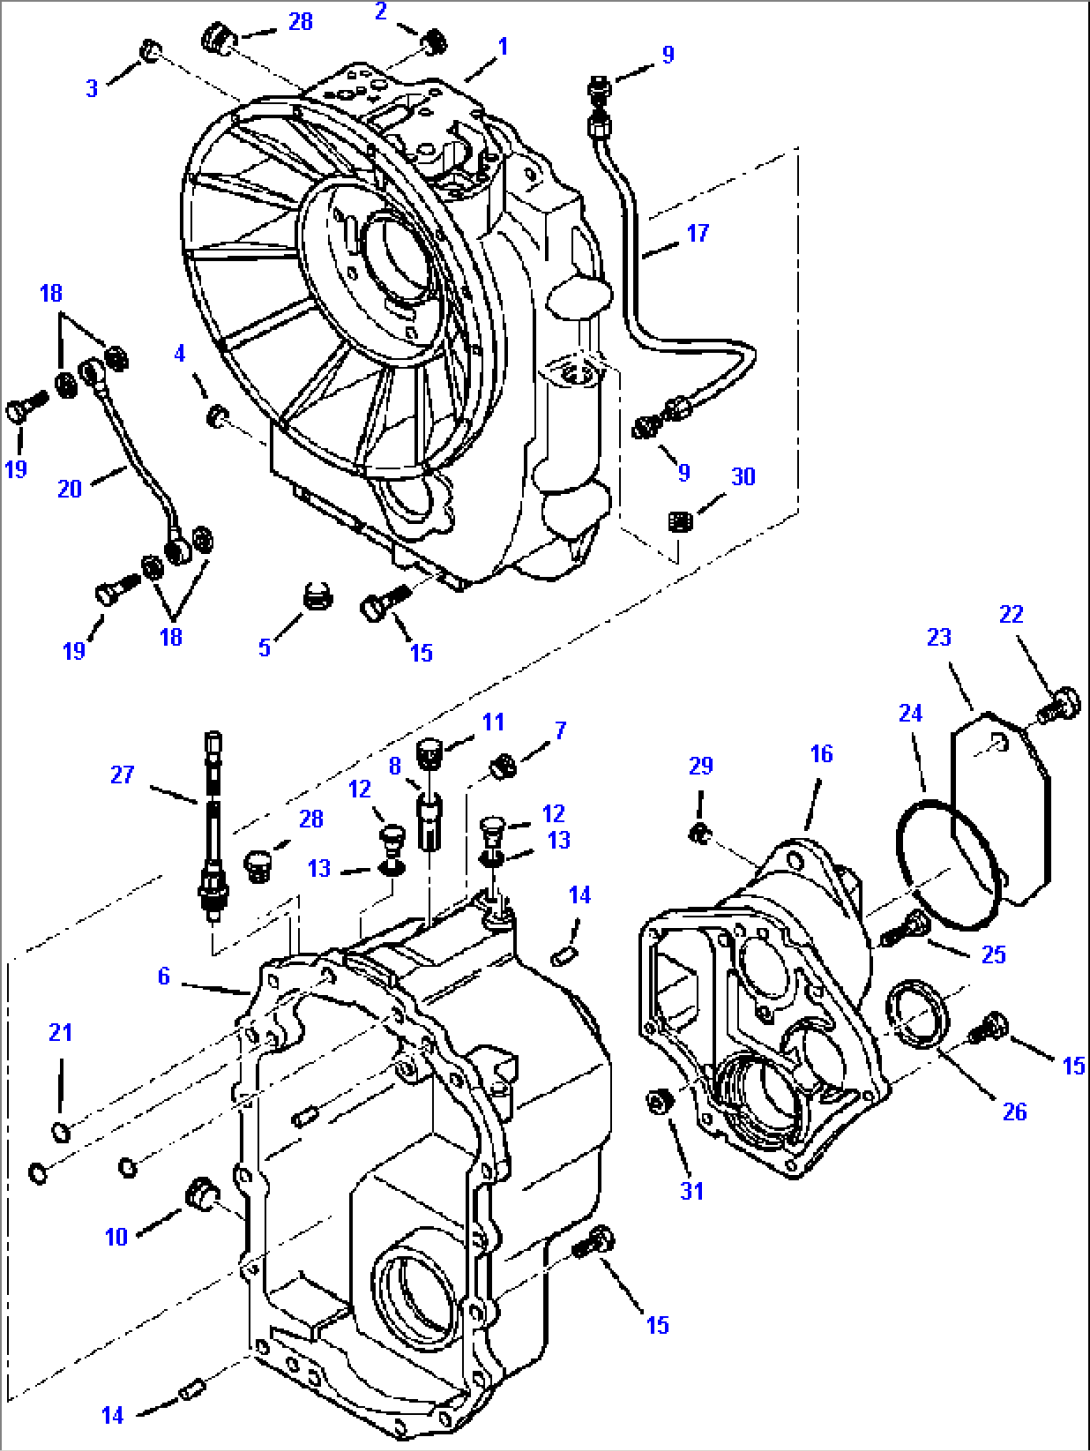 FIG. F3300-01A2 TRANSMISSION - FRONT AND REAR HOUSINGS